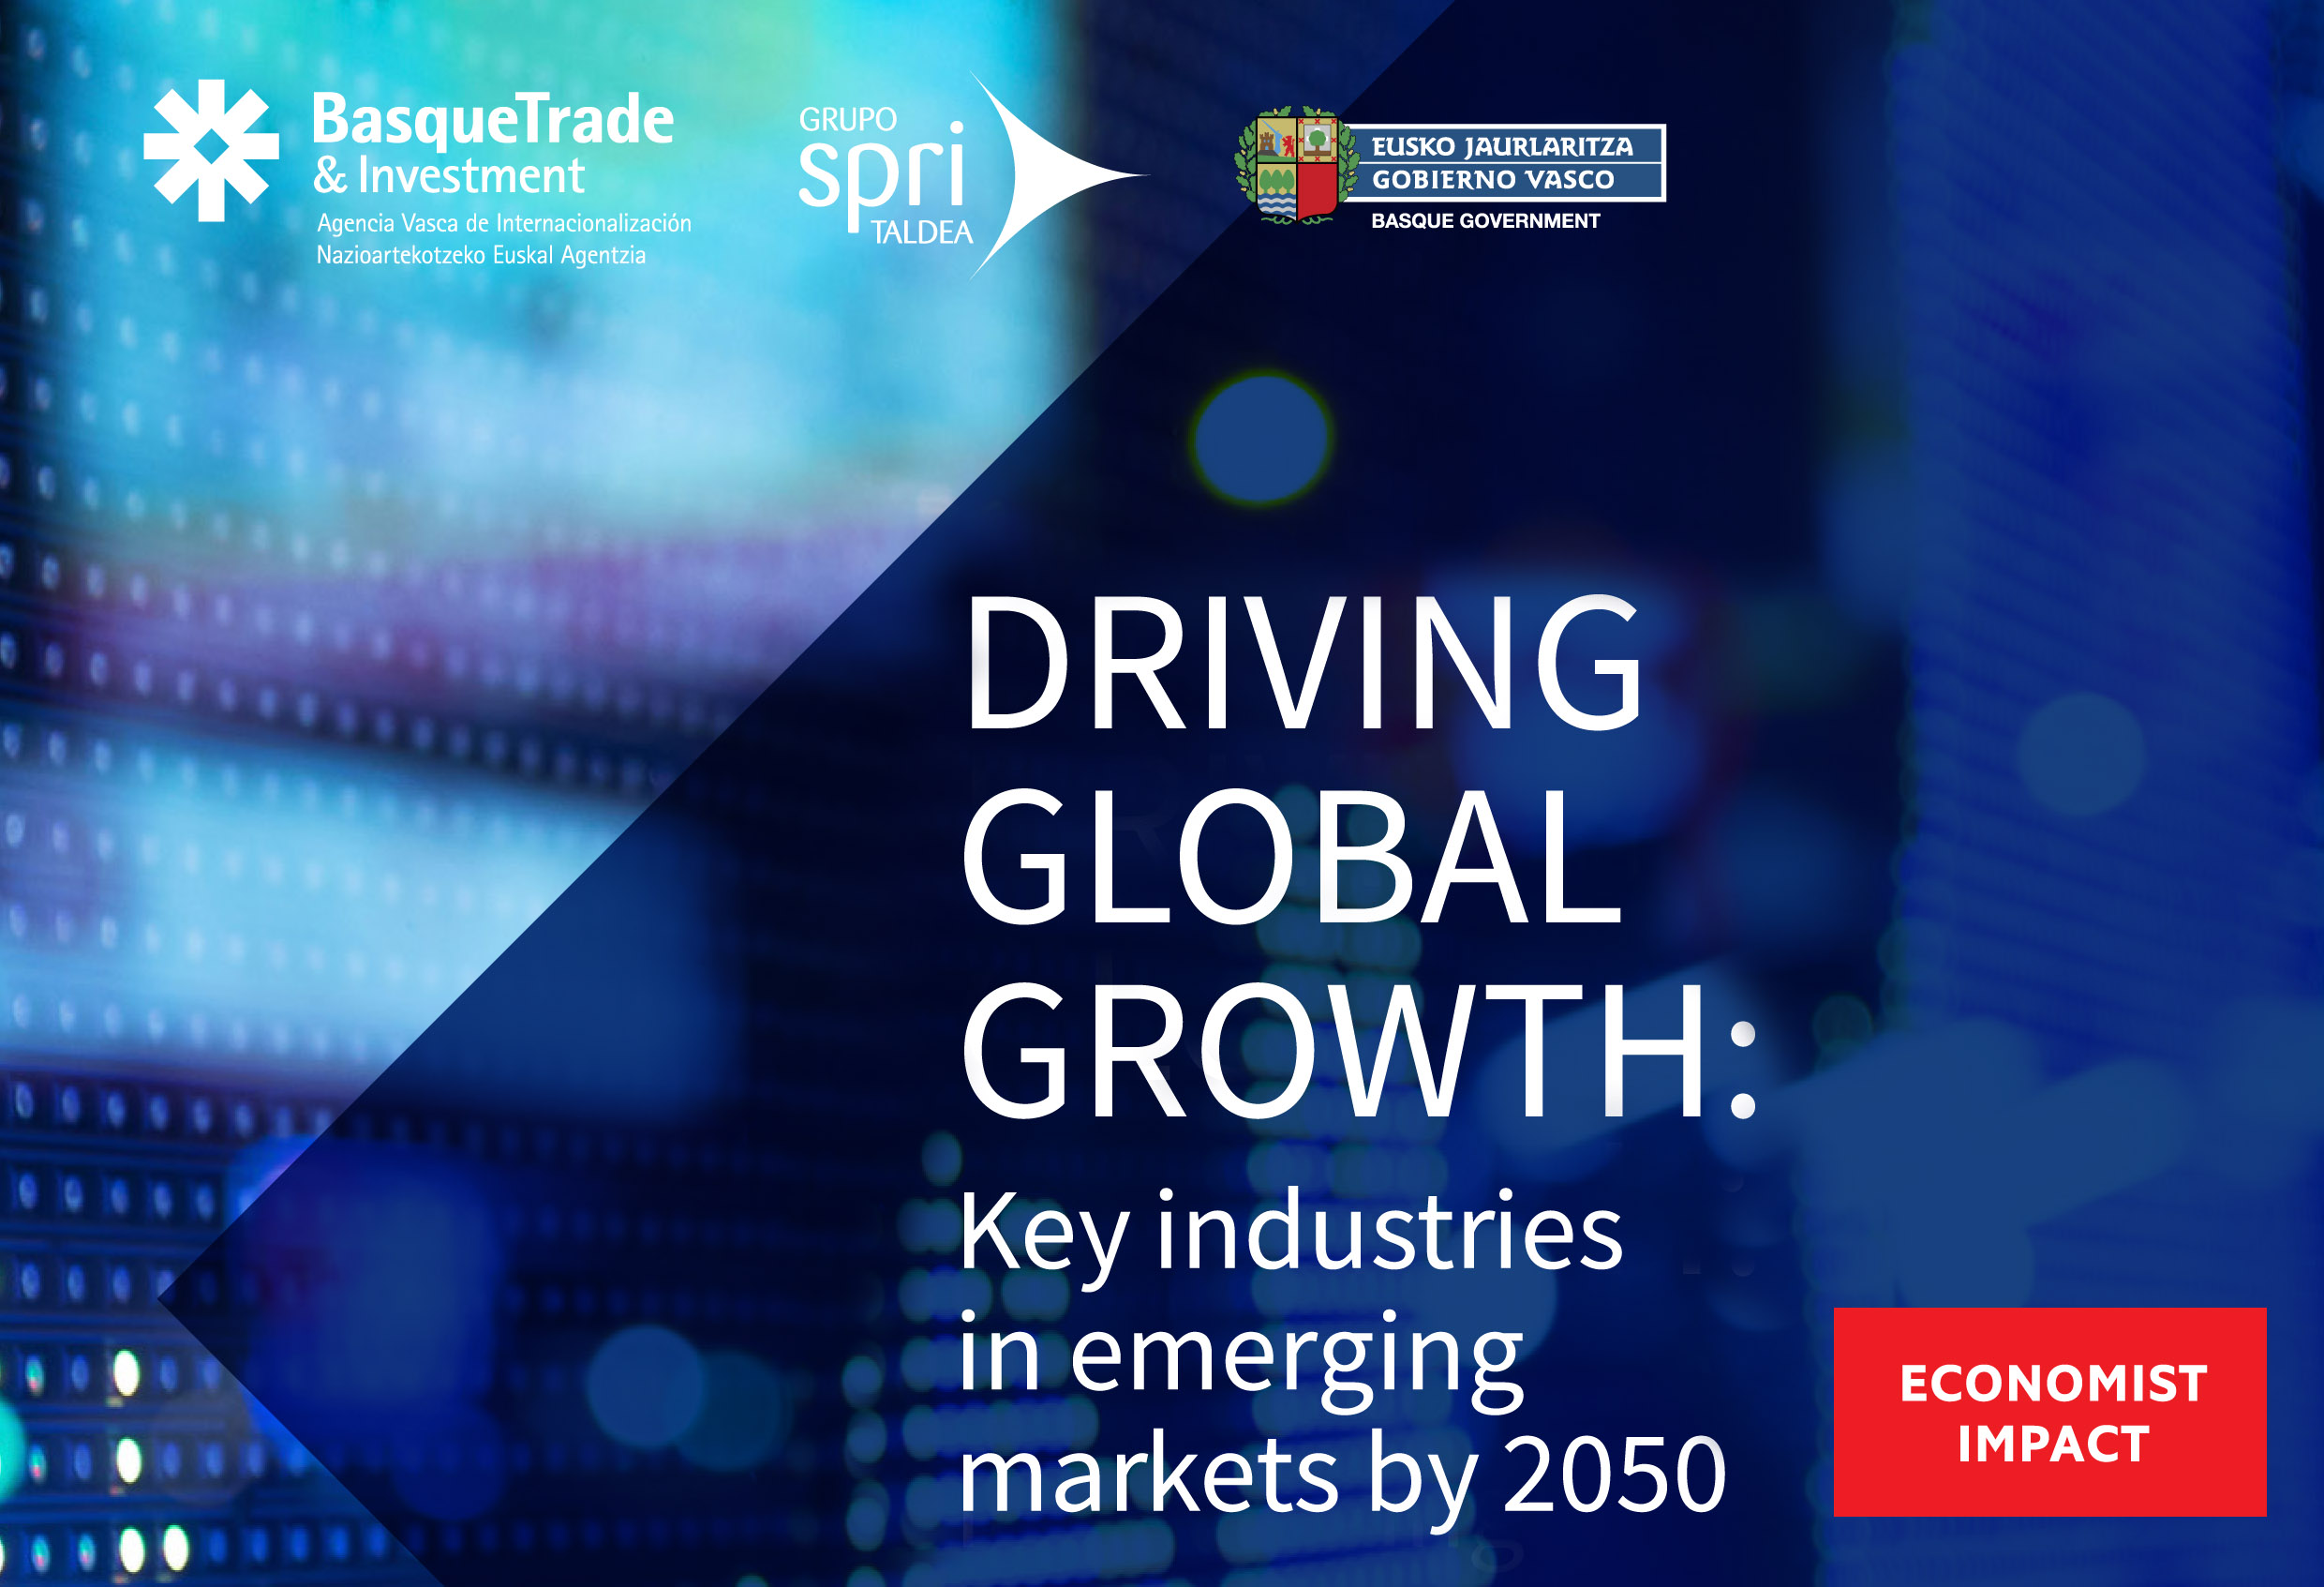 Driving Global Growth